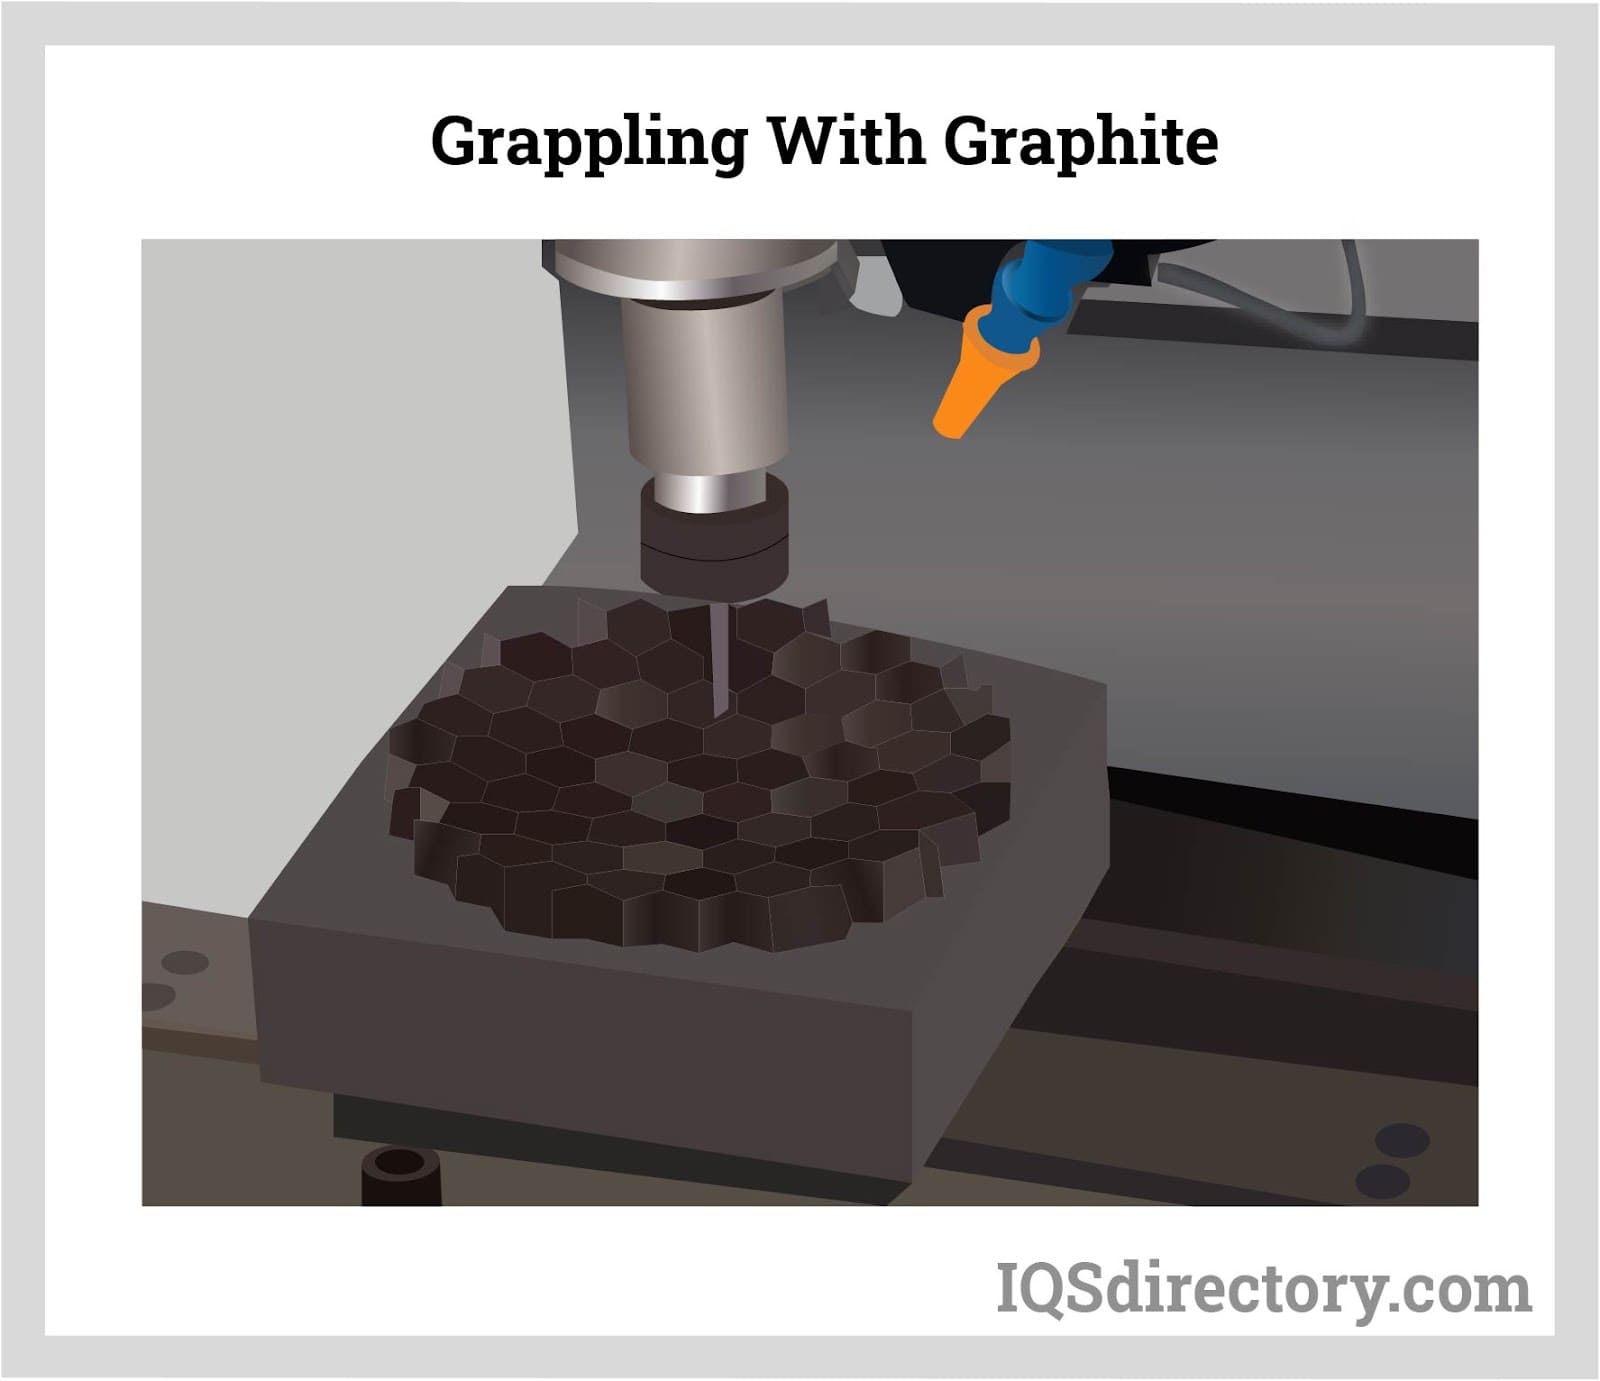 Grappling with Graphite